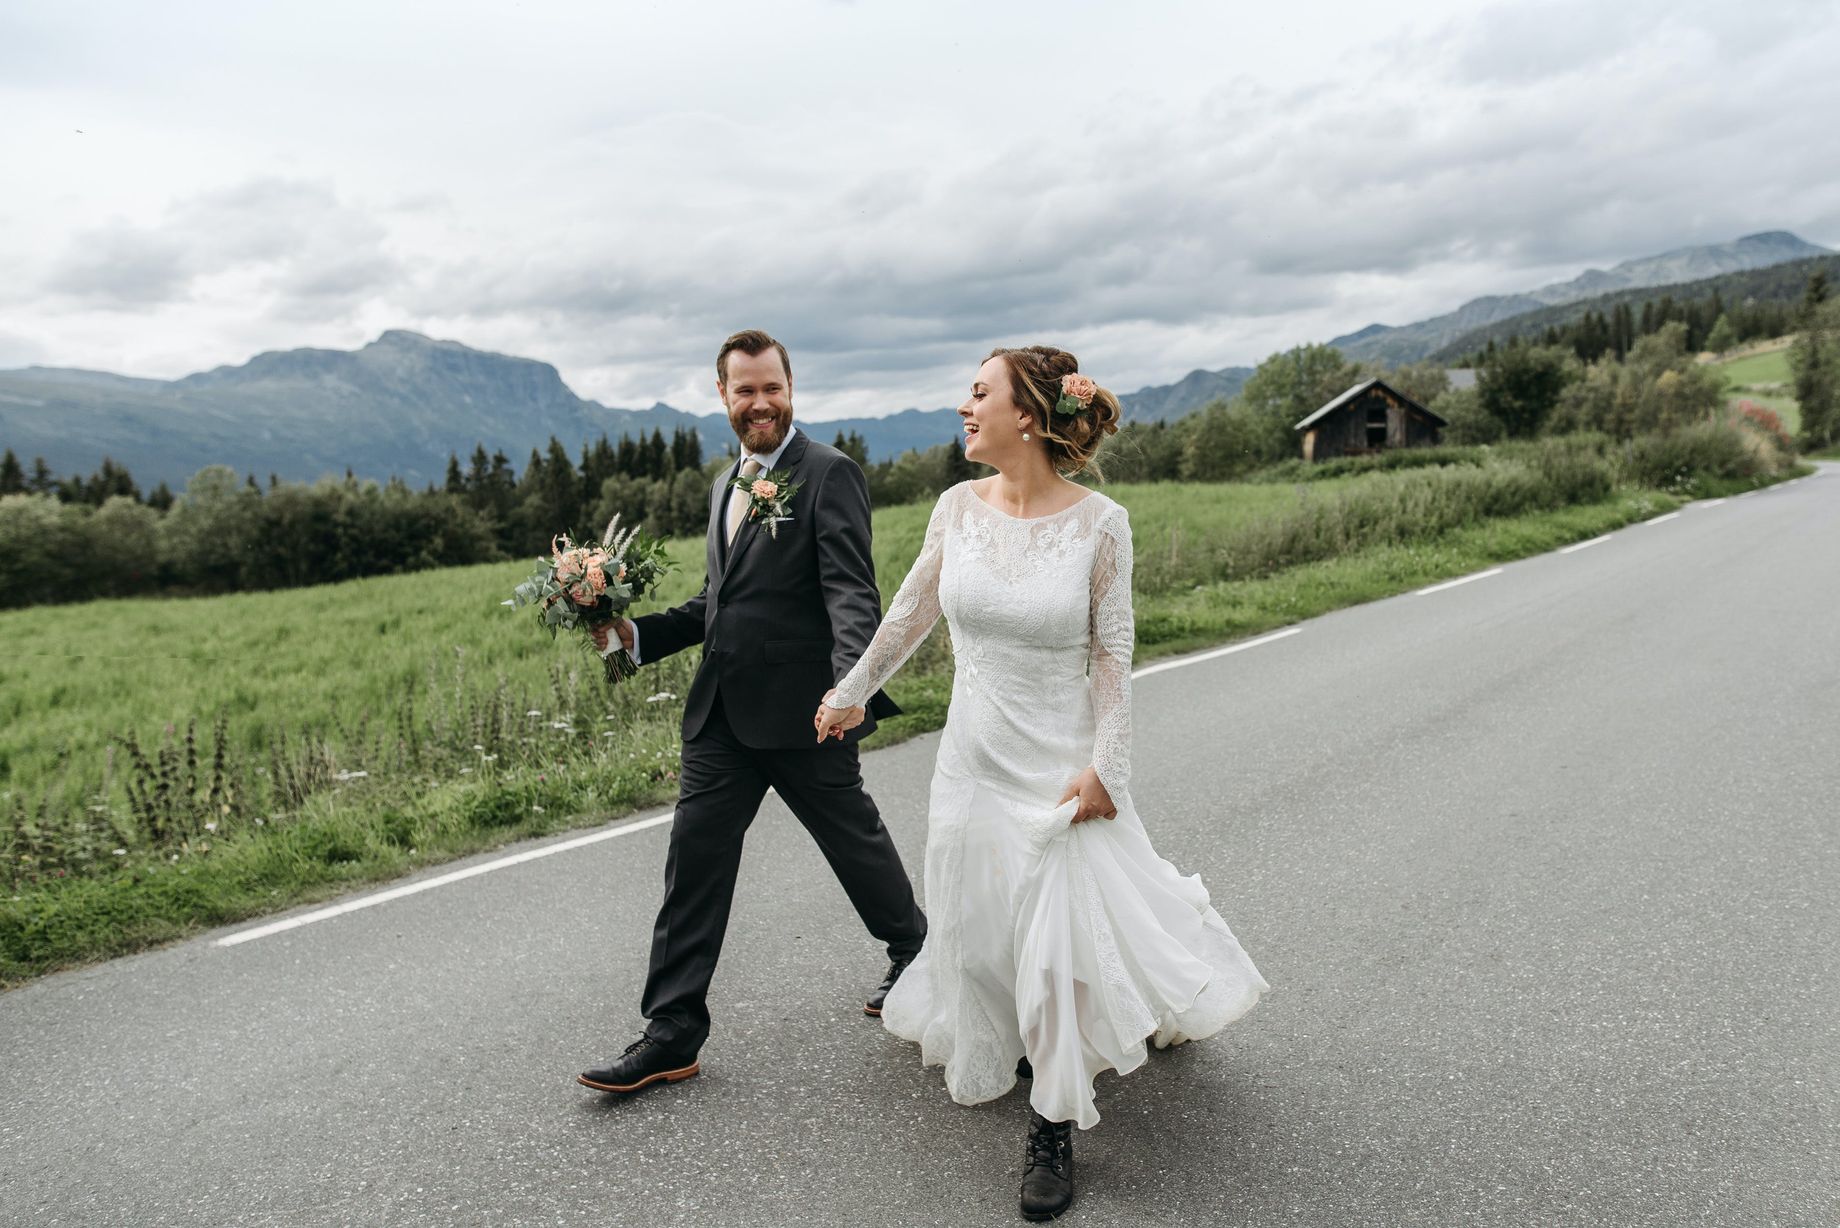 A Bride and Groom Walking on the Road Hand in Hand